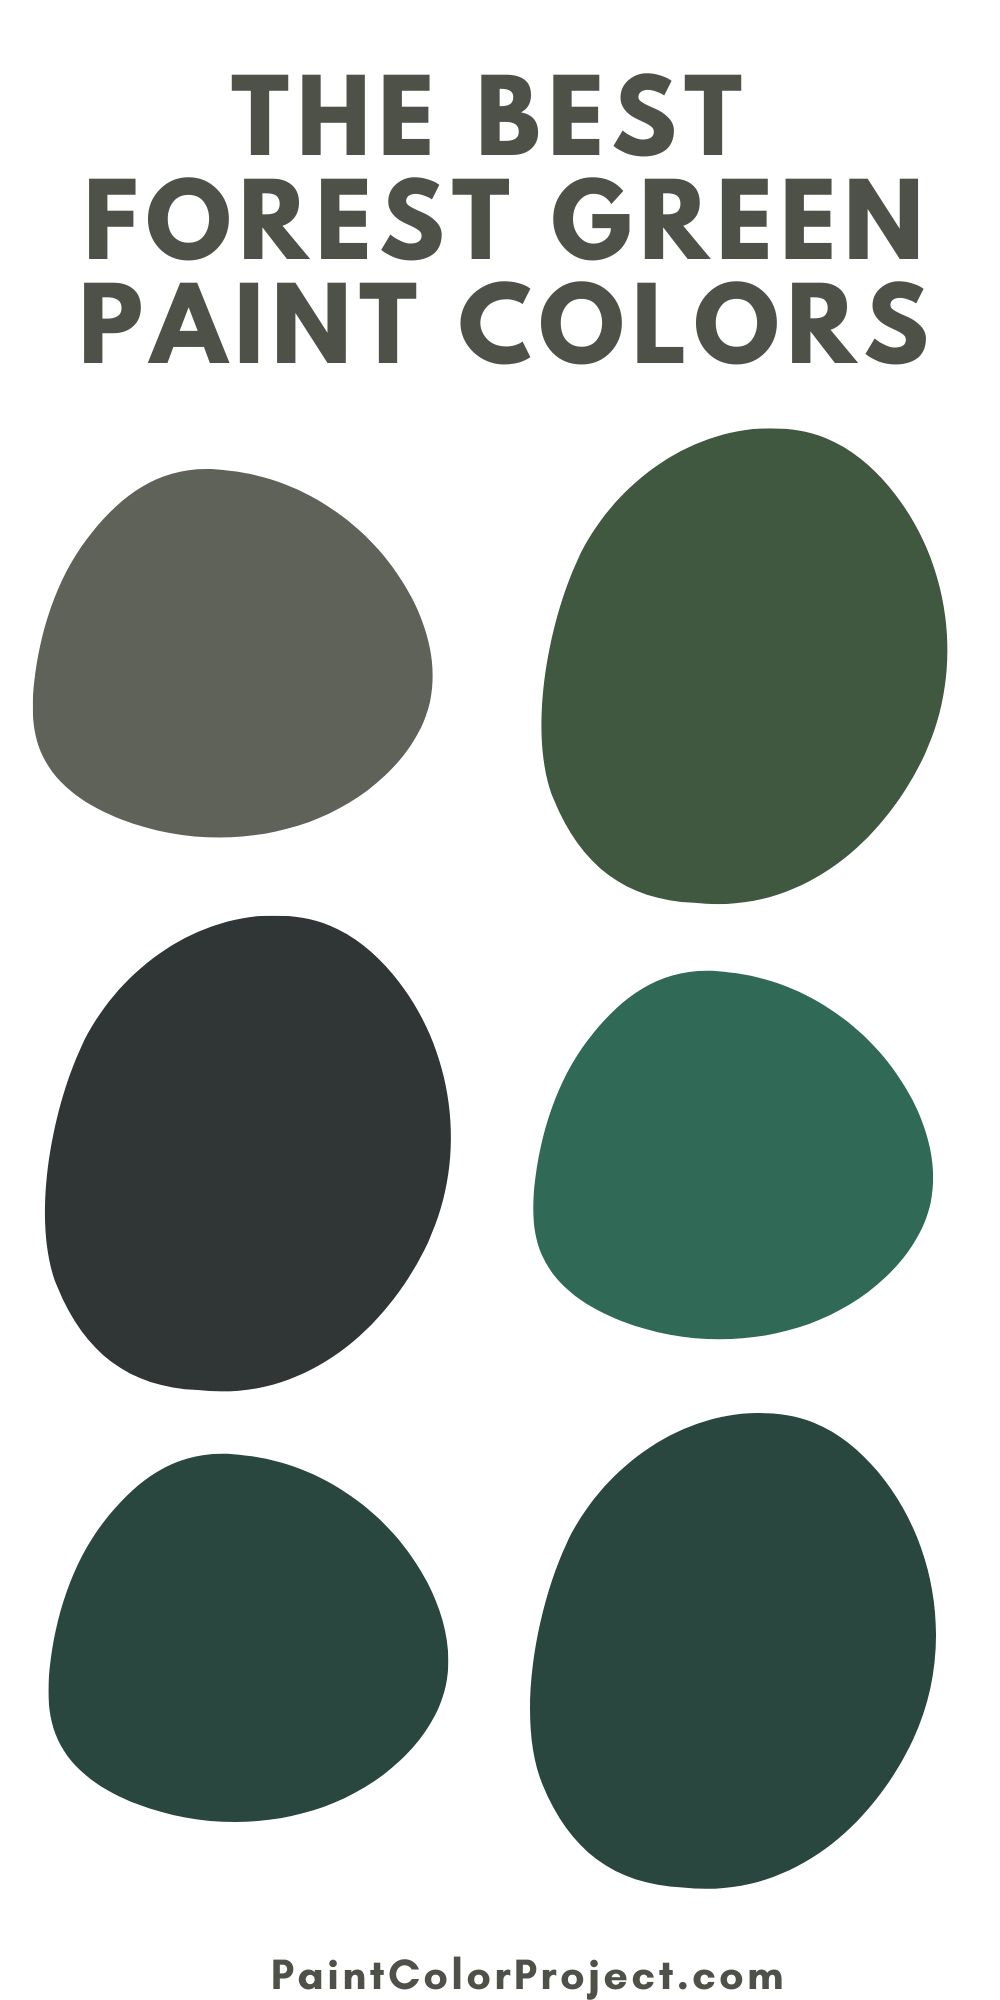 the best forest green paint colors (1)